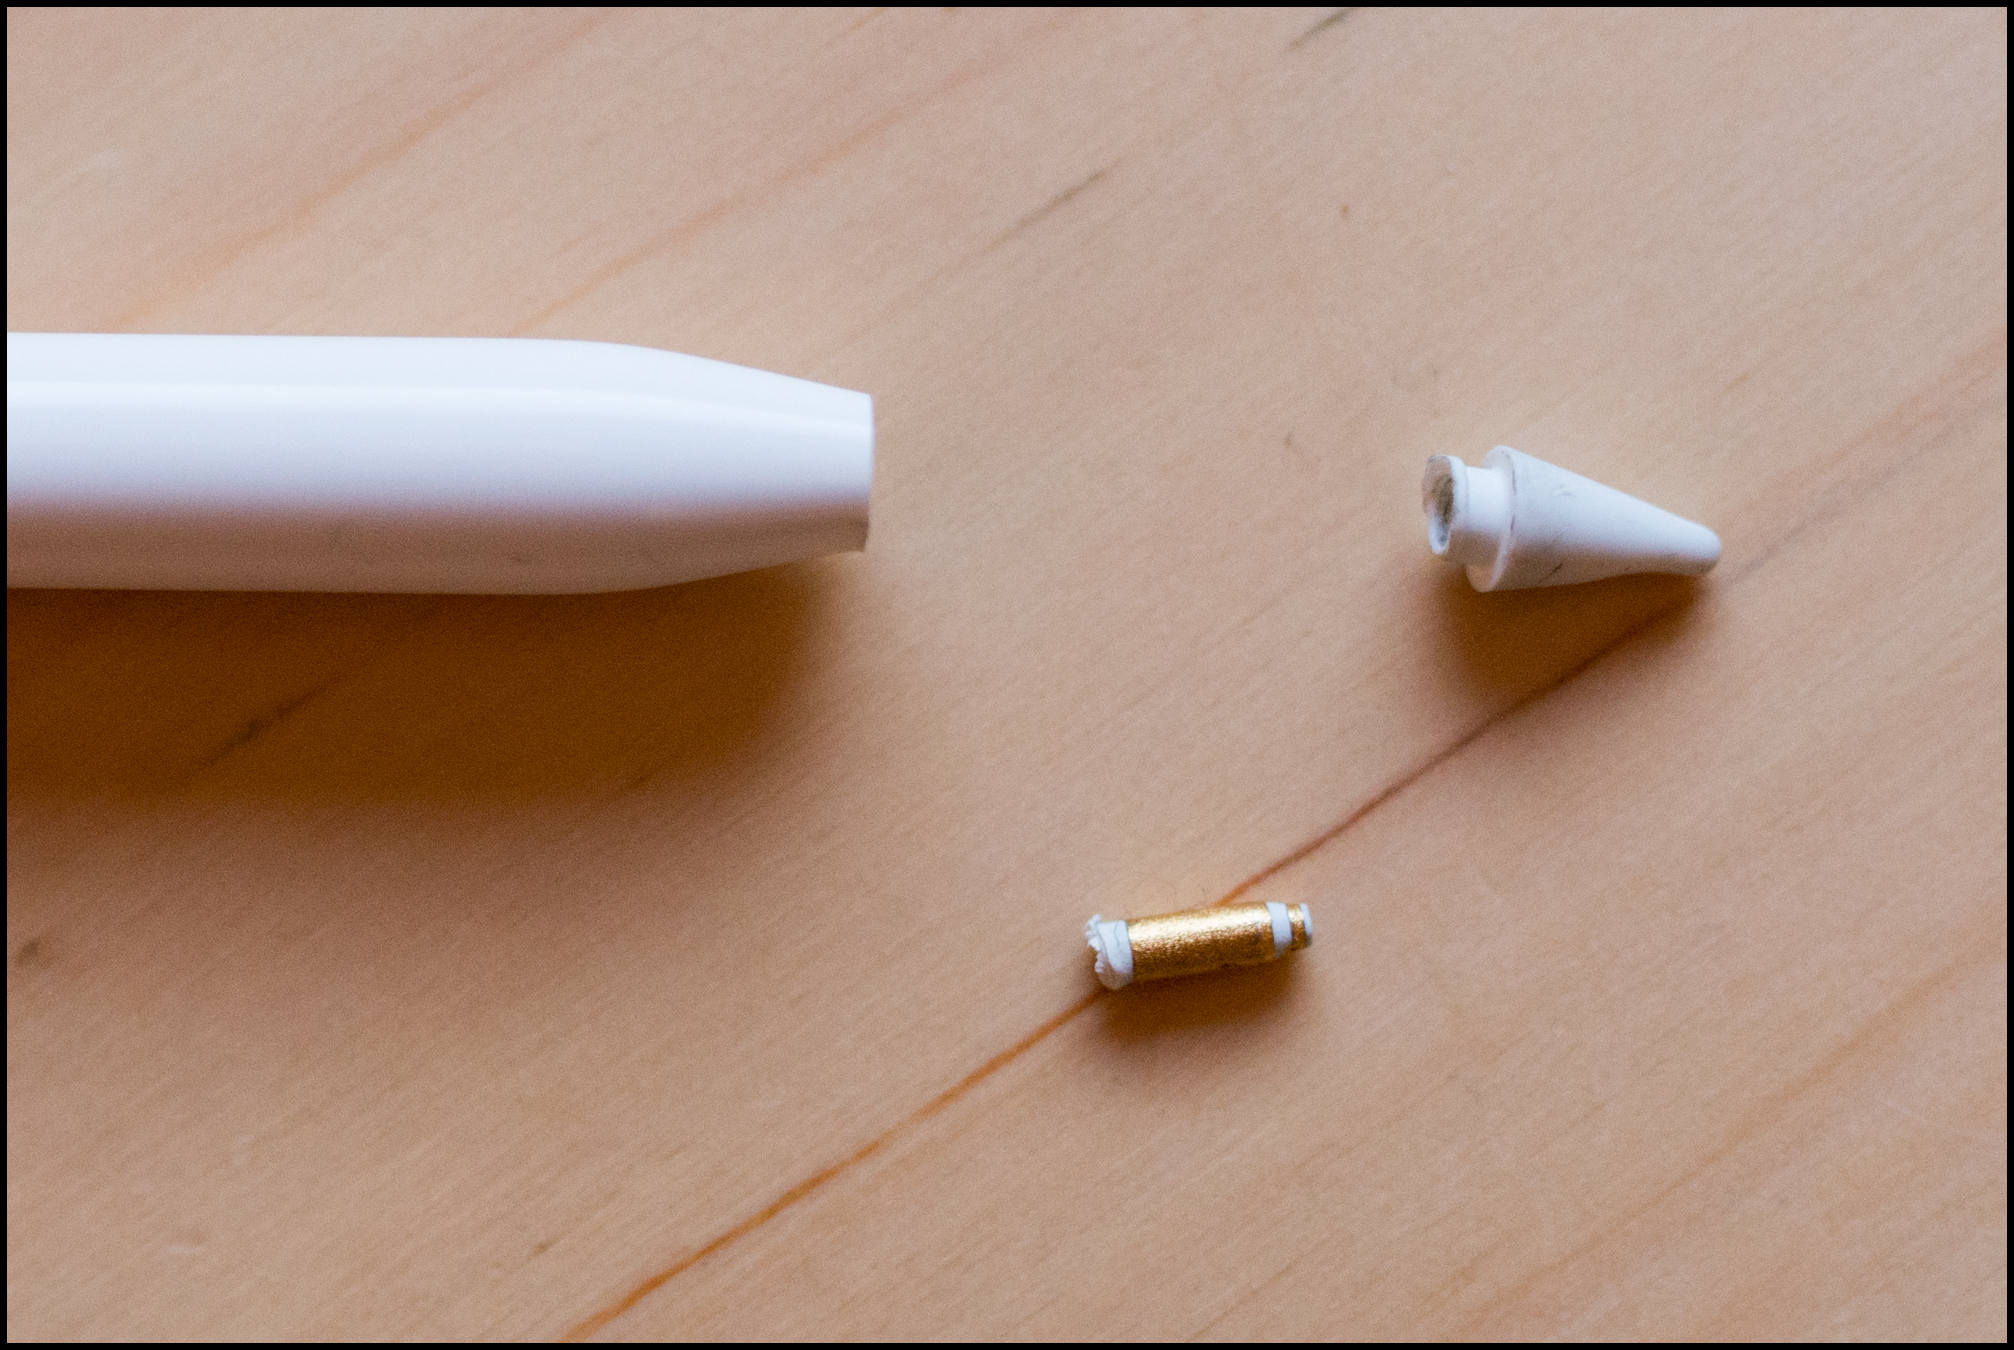 iPad Pro - Be Careful! The Apple Pencil is more fragile than you think